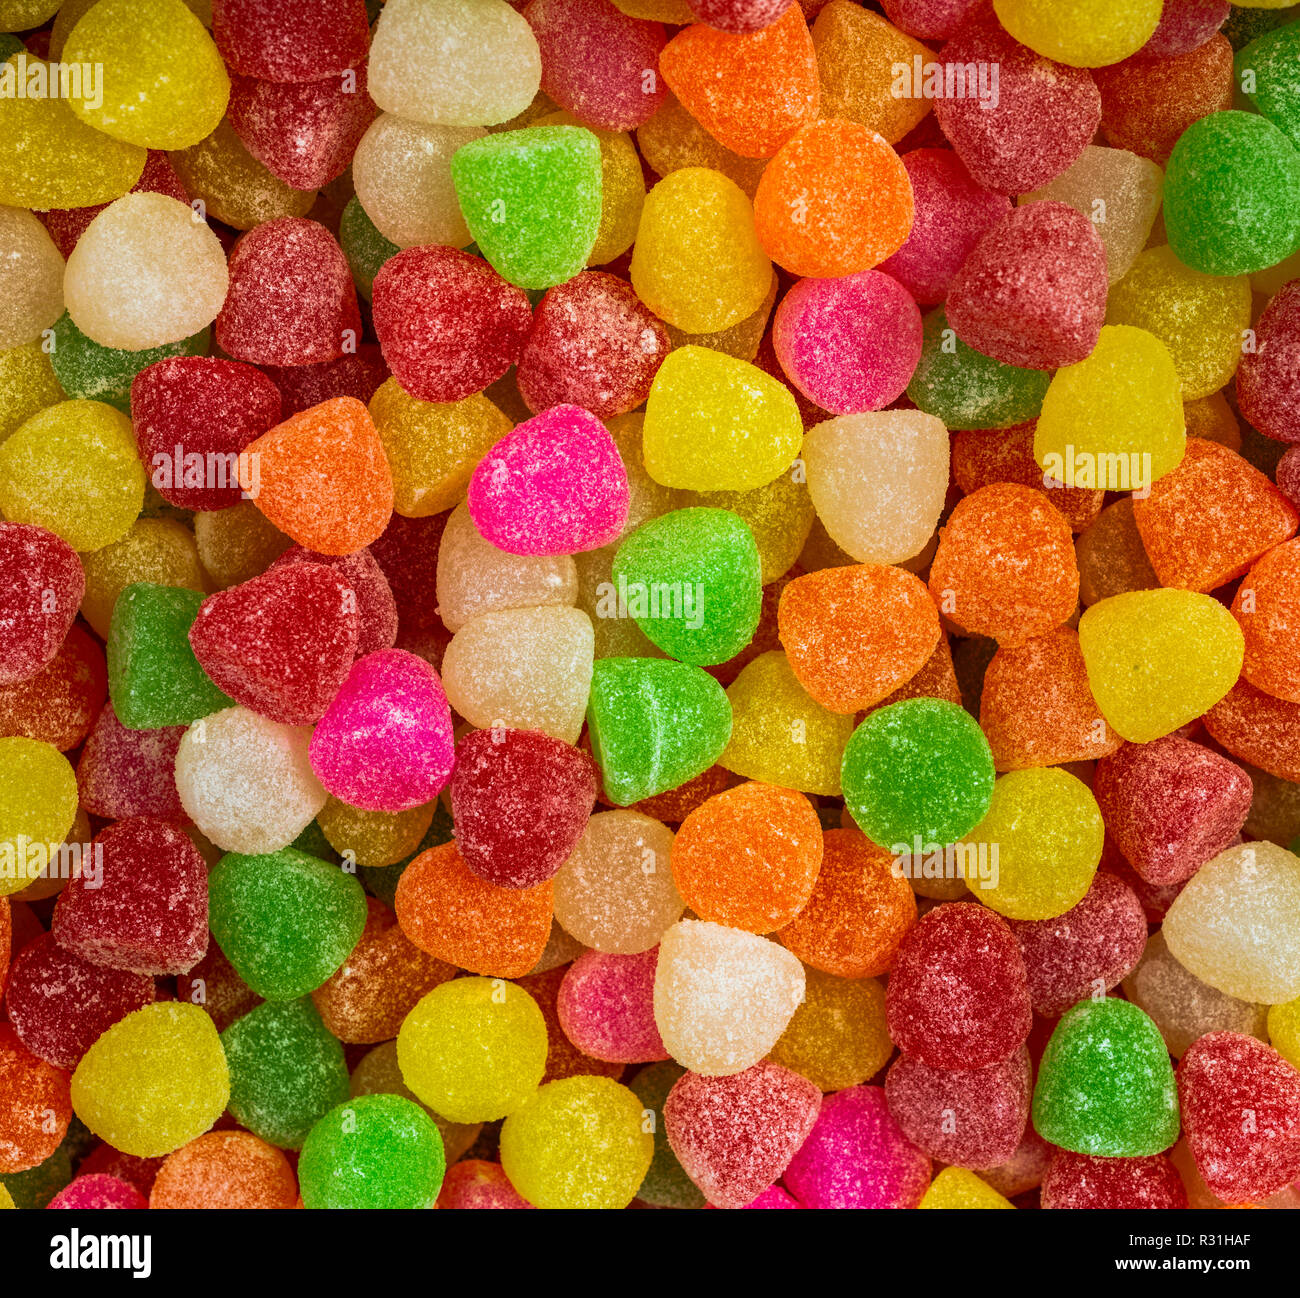 Gum Drops, background image, Canada Stock Photo